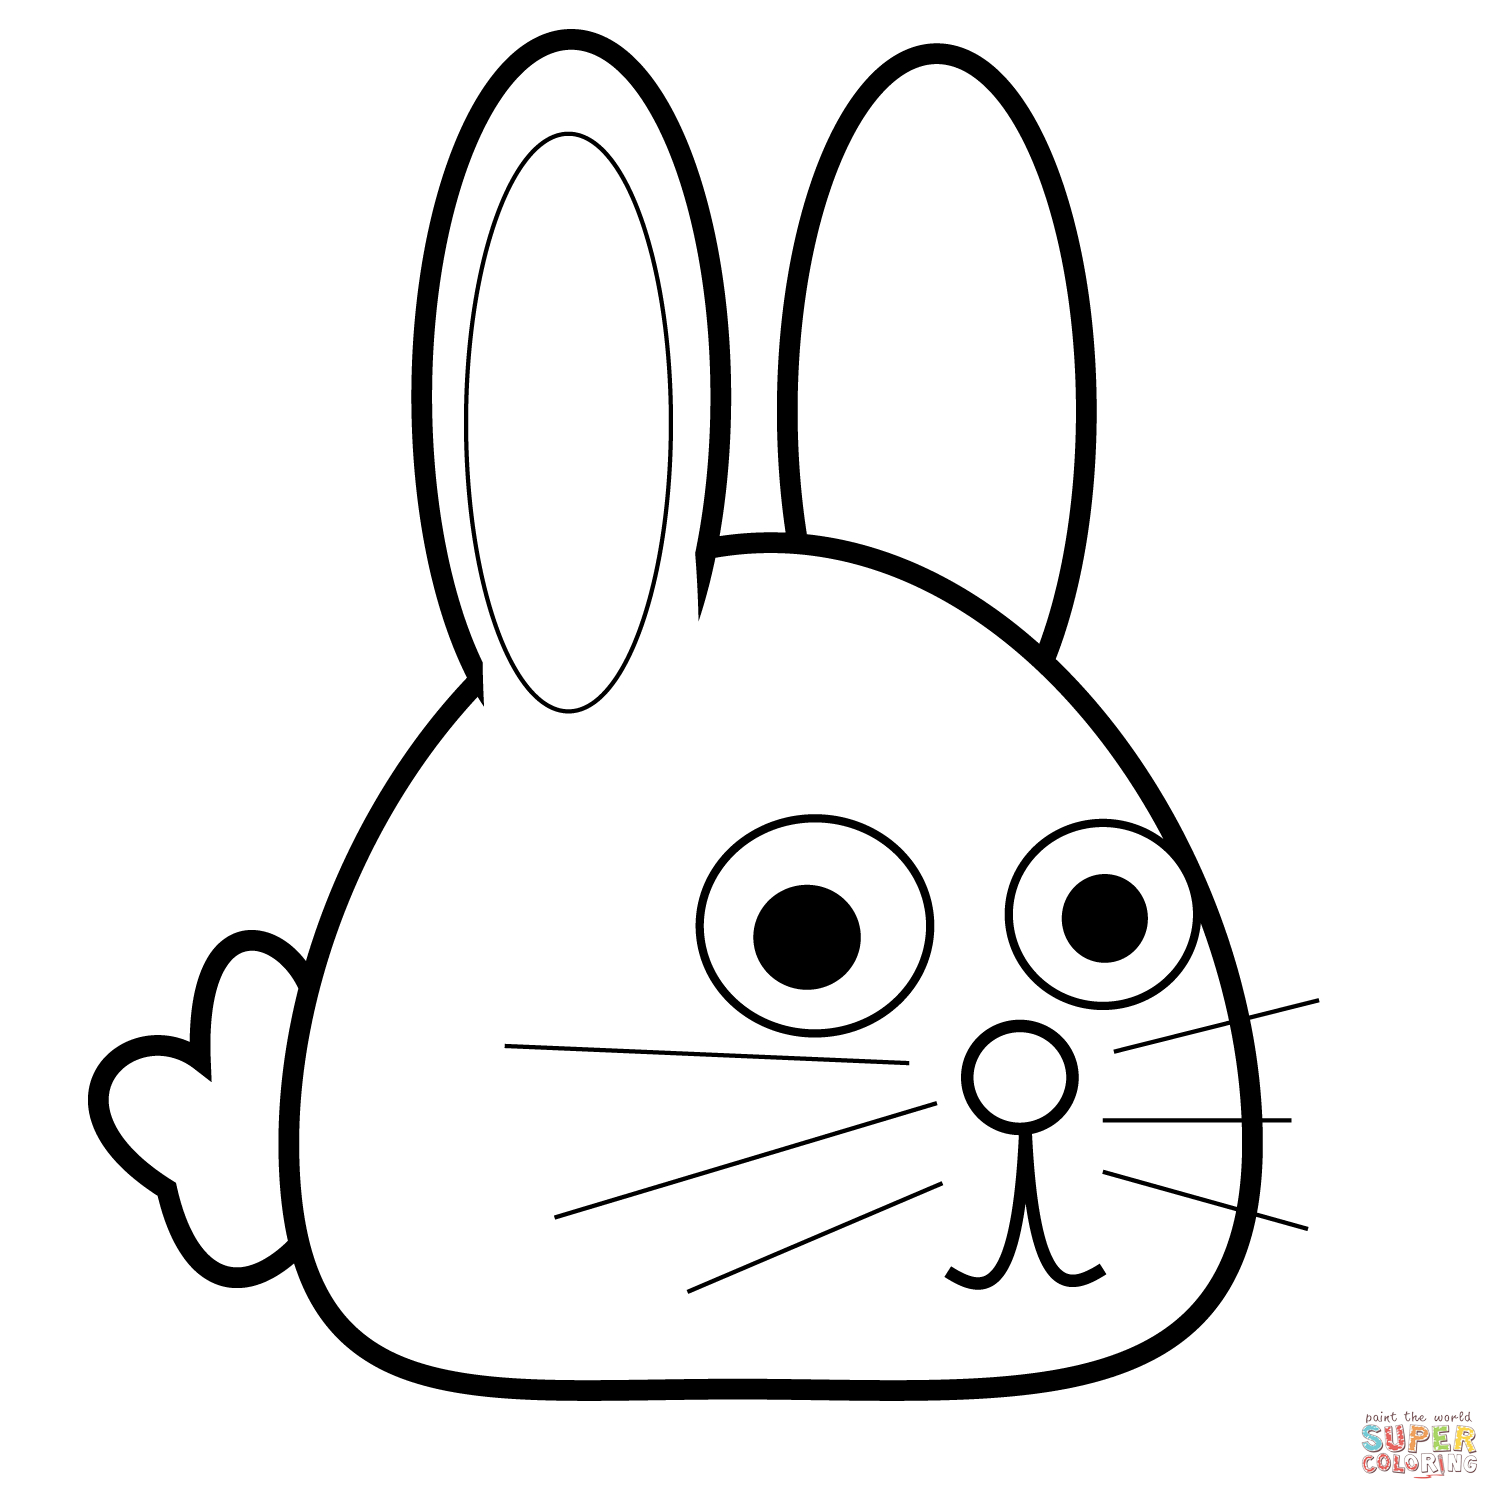 Spring Bunny Coloring Page | Free Printable Coloring Pages - Free Printable Bunny Pictures